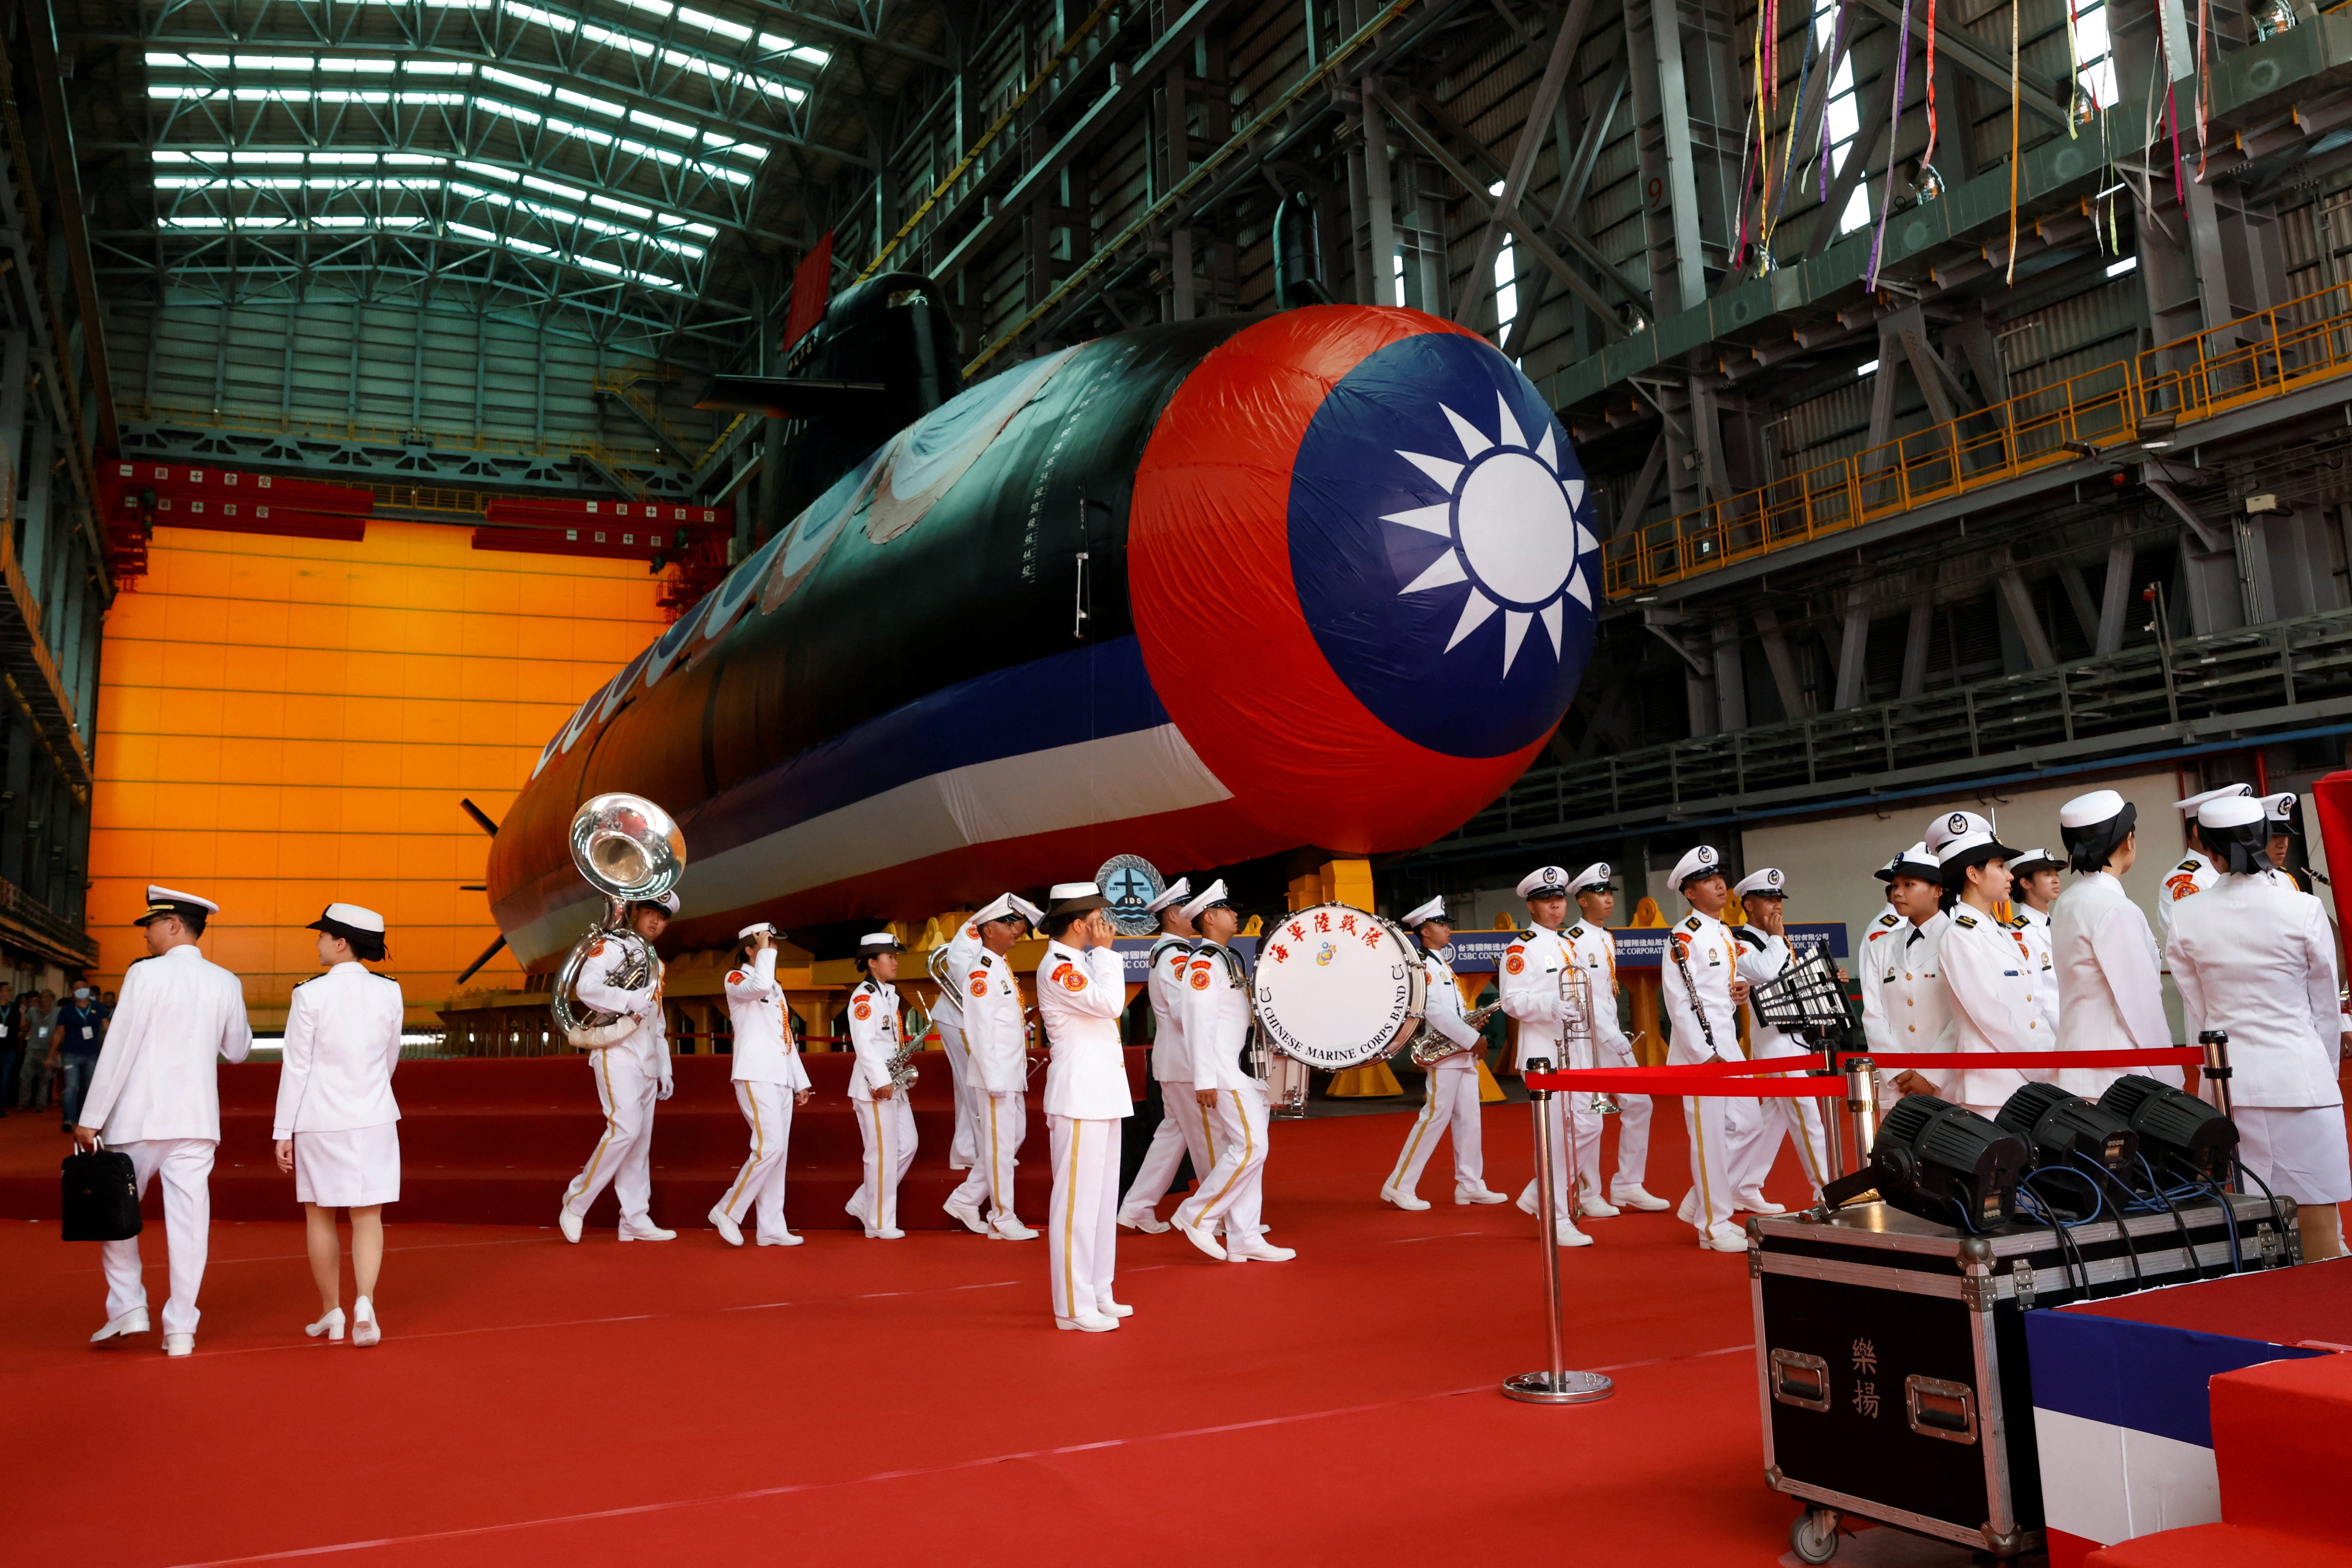 Launching ceremony of Taiwan’s first domestically built submarine, in Kaohsiung